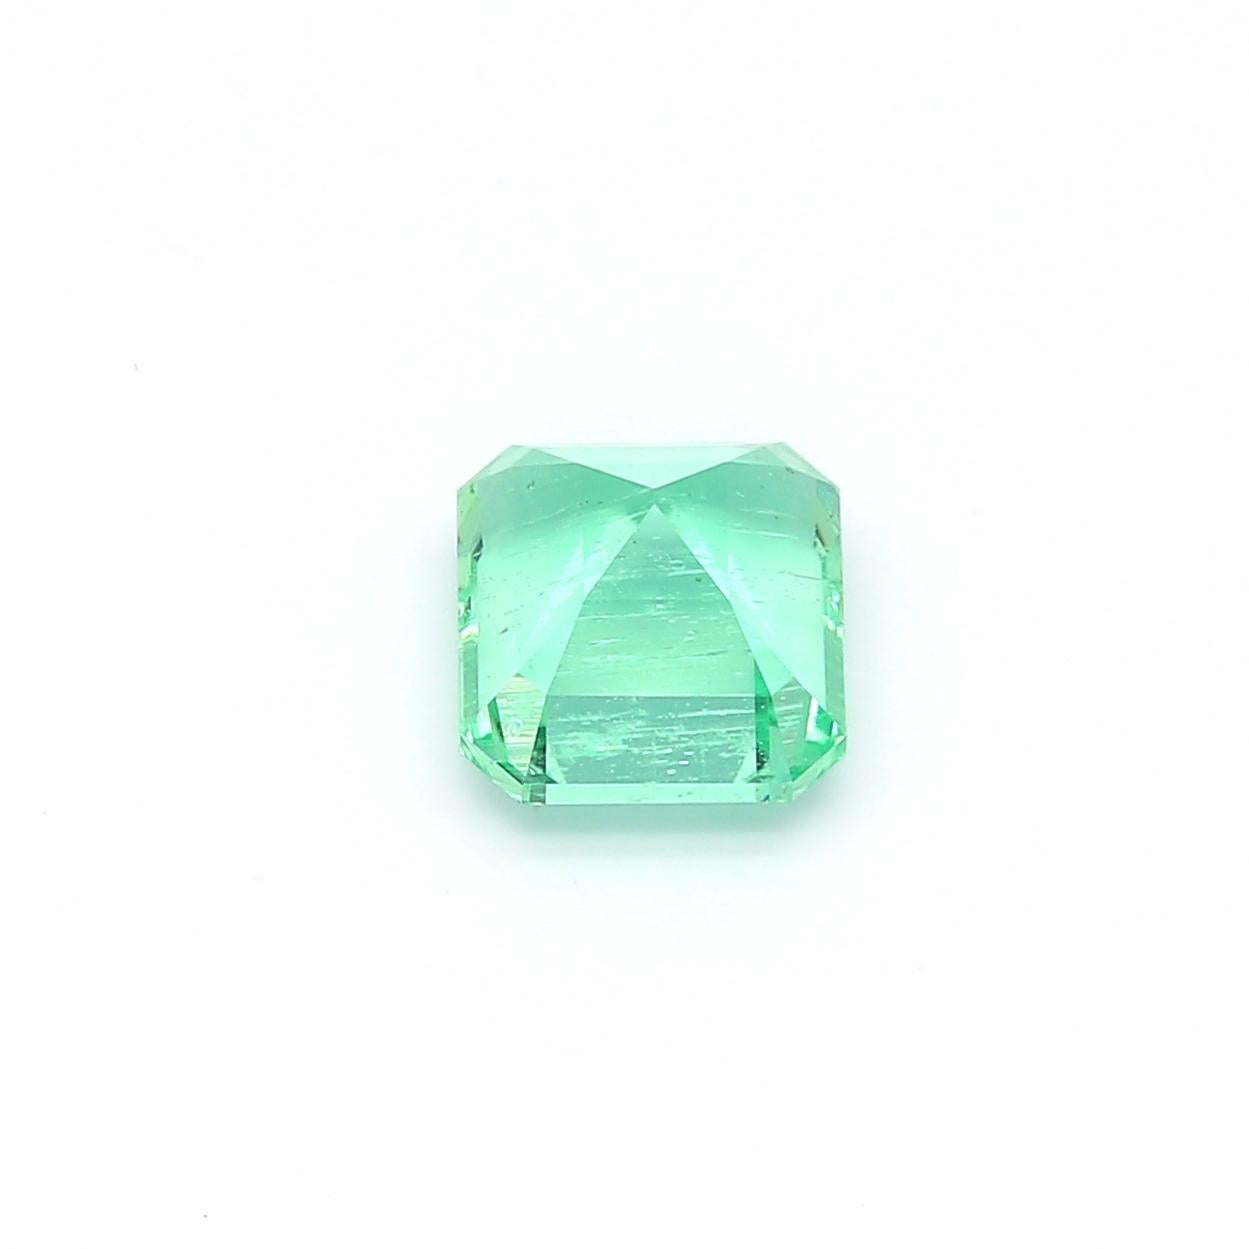 An amazing octagon-shaped Russian Emerald which allows jewelers to create a unique piece of wearable art.
This exceptional quality gemstone would make a custom-made jewelry design. Perfect for a Ring or Pendant.

Shape - Octagon
Weight - 1.84